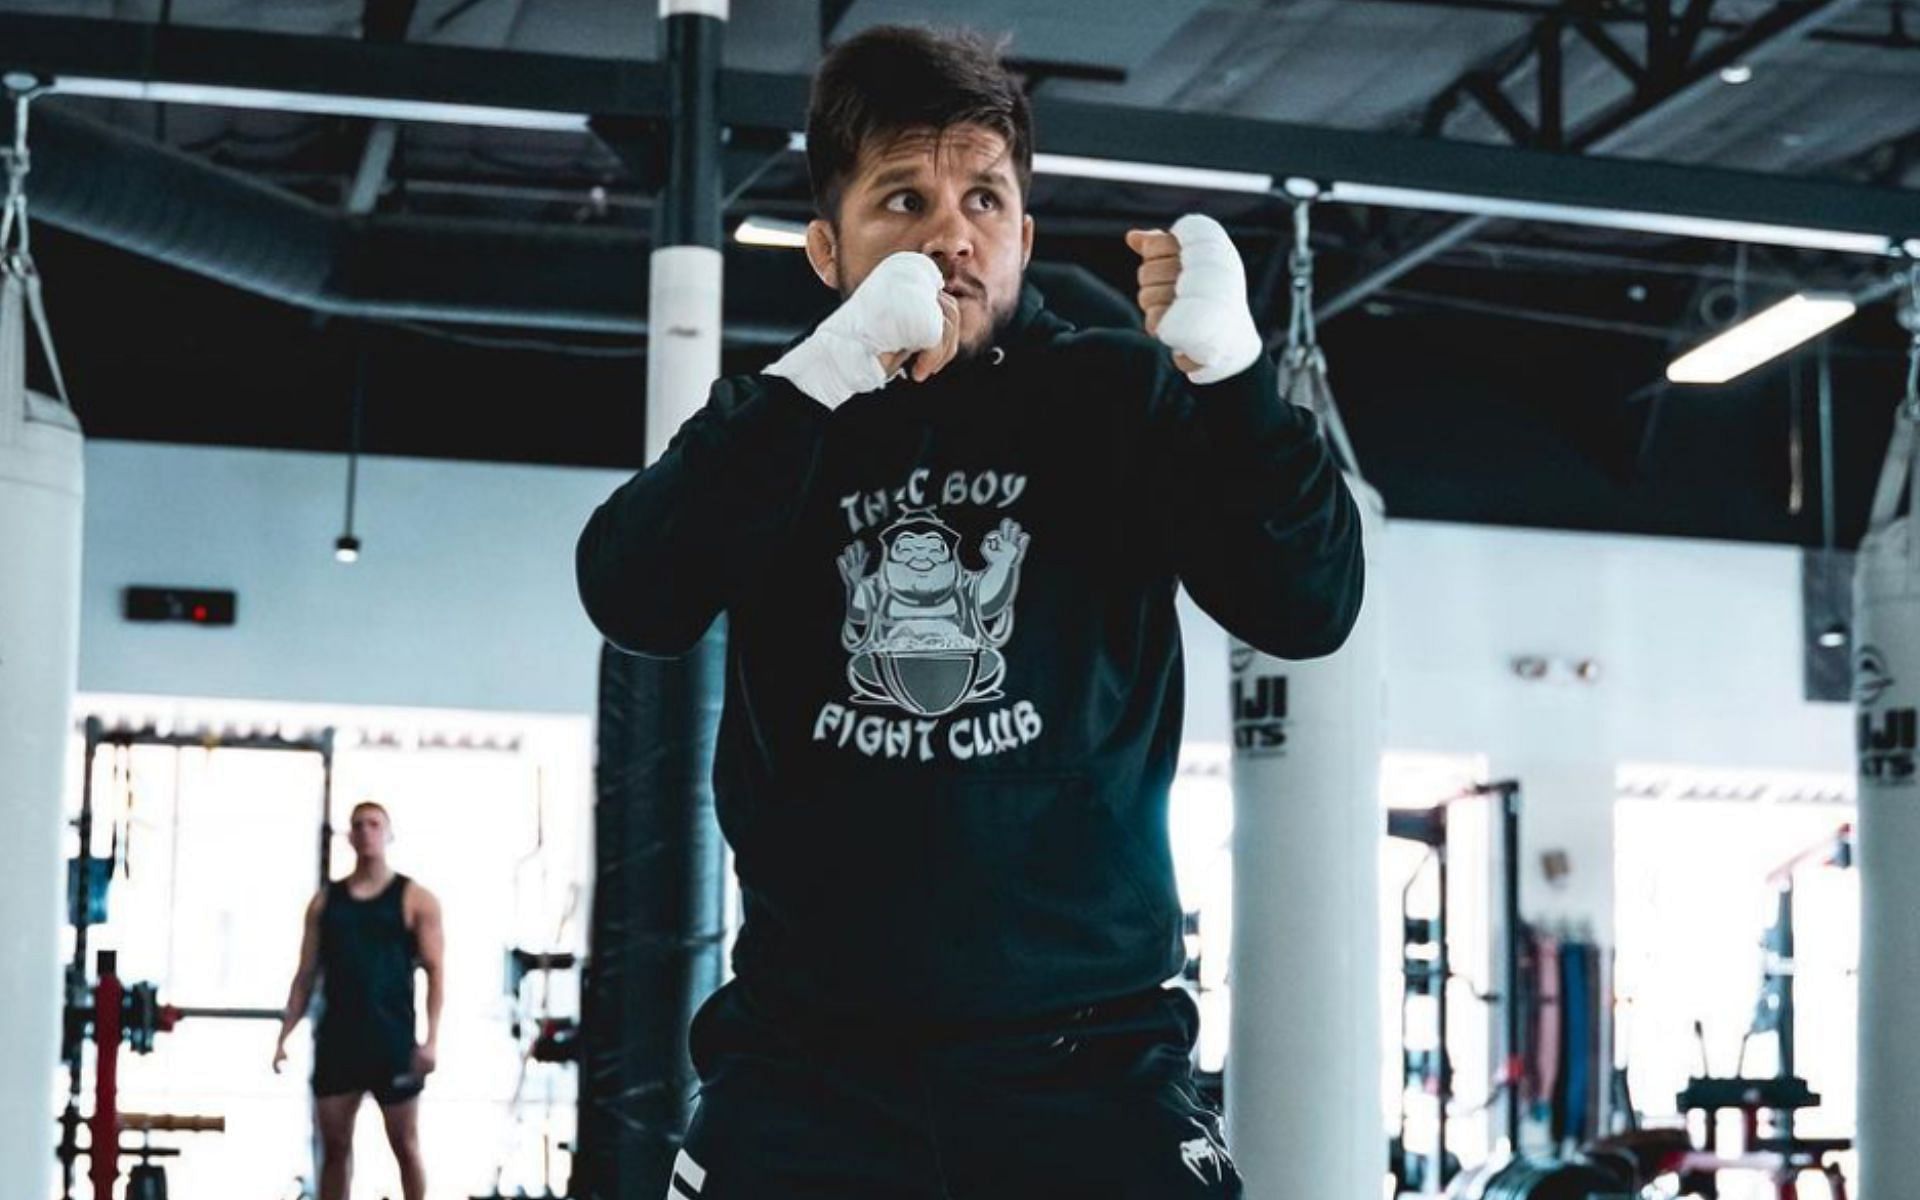 Henry Cejudo called out for a top 10 bantamweight showdown following two-fight losing streak [Photo Courtesy @henry_cejudo on Instagram]